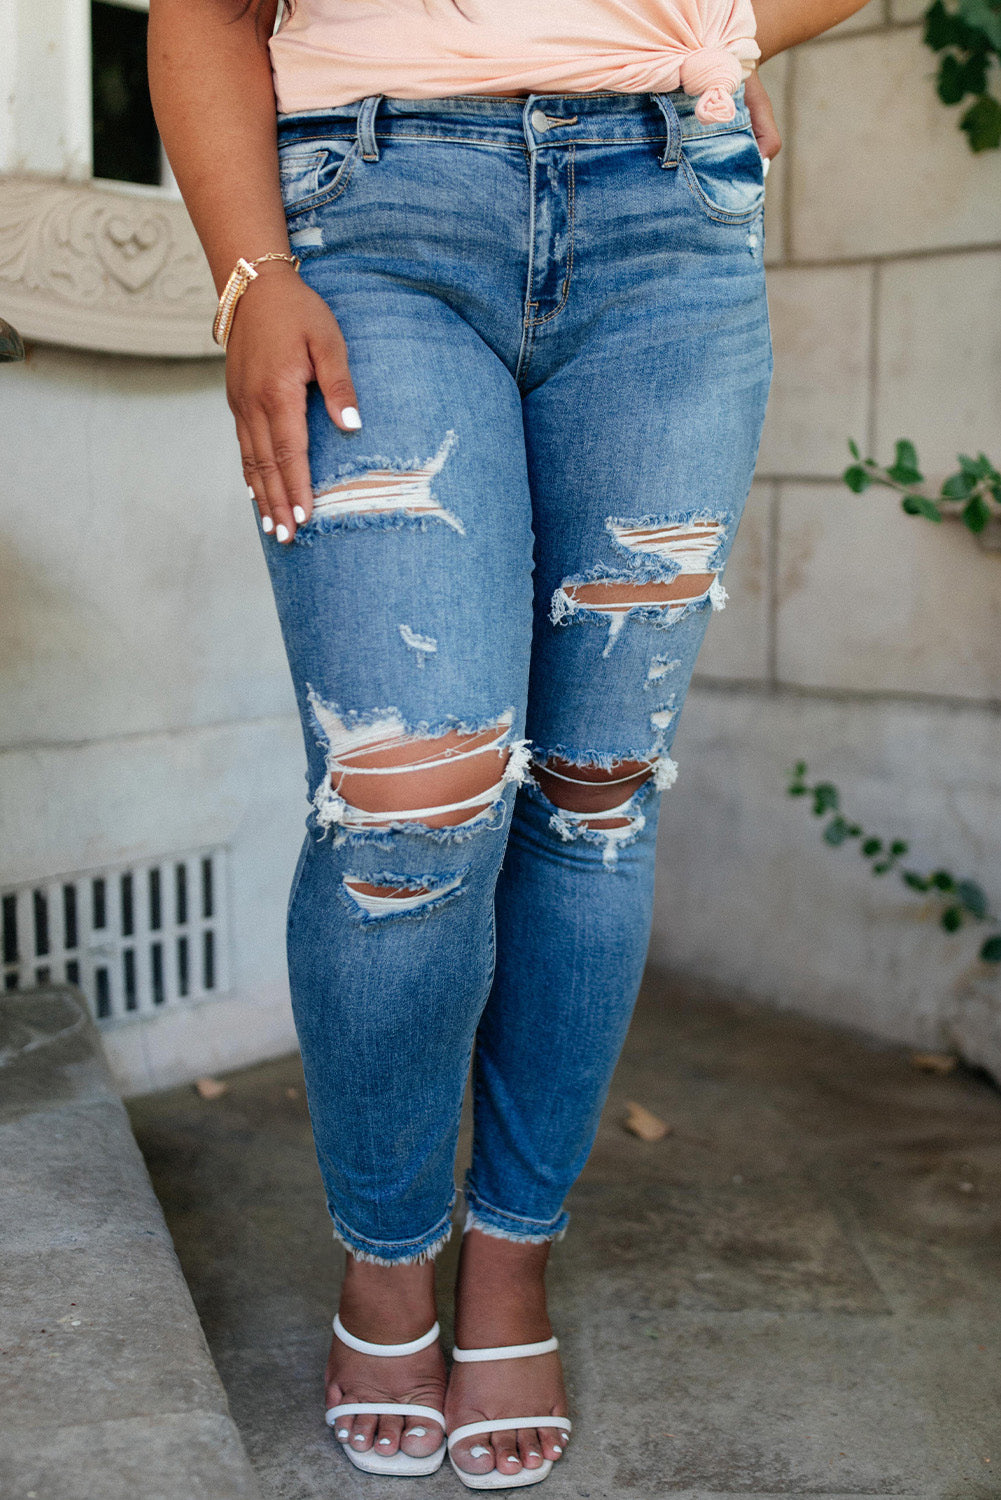 Something To Remember Plus Size Denim Jeans